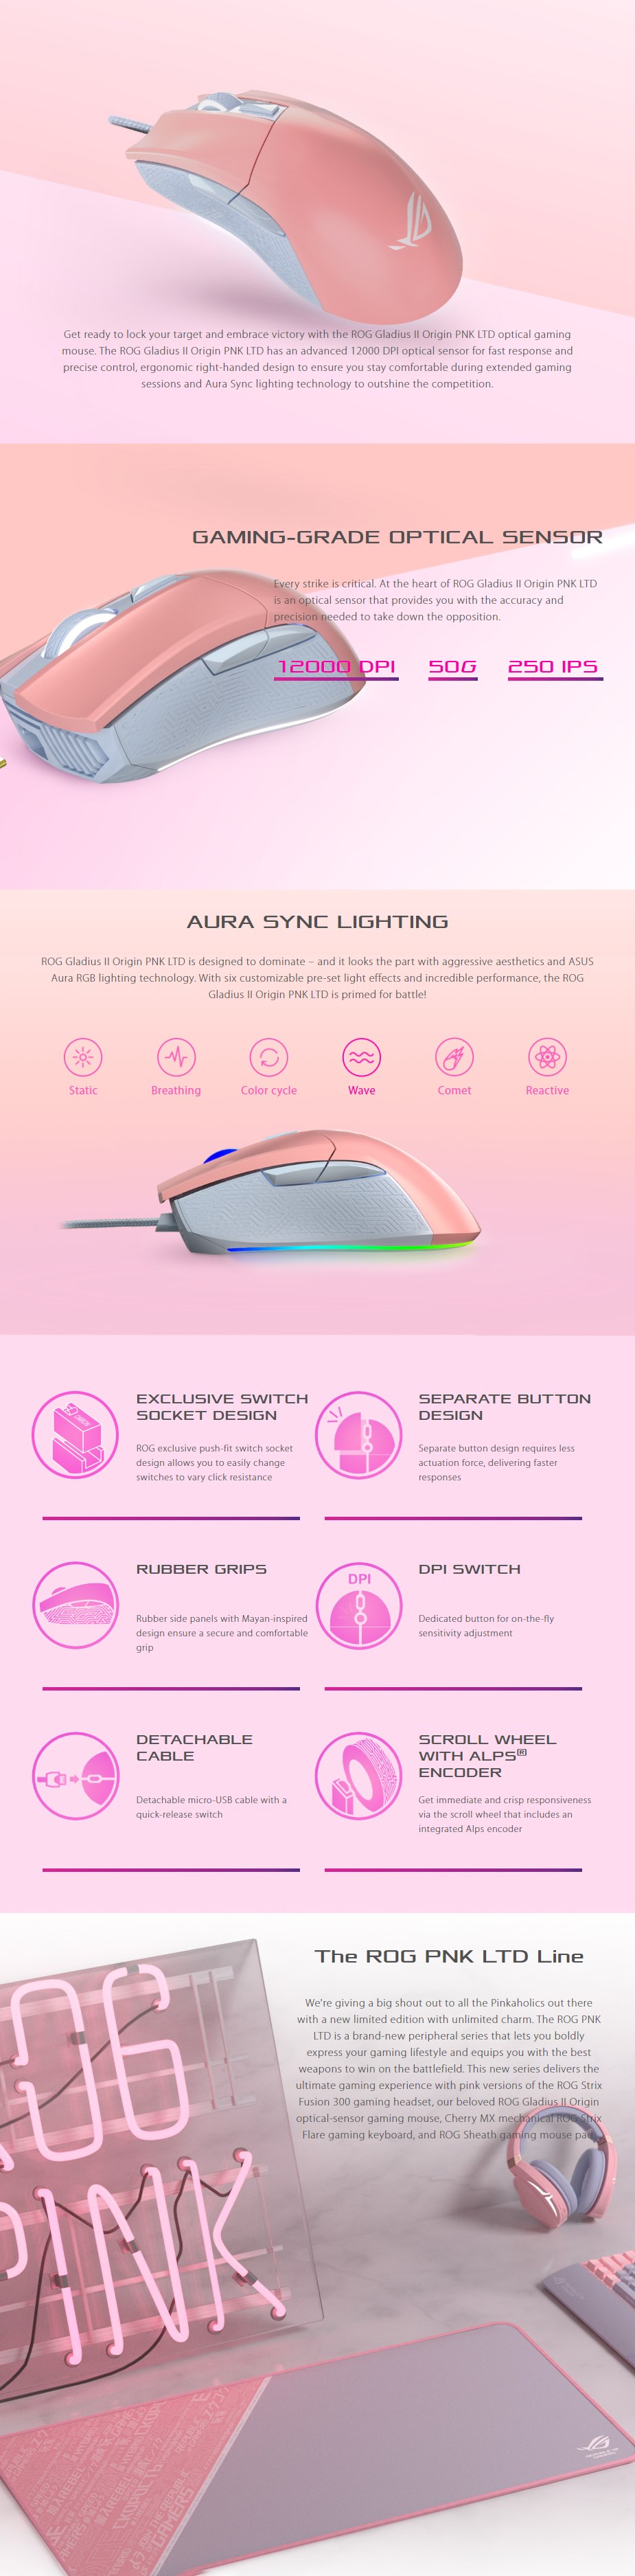 ASUS ROG Gladius II RGB Optical Gaming Mouse - Pink Edition - Overview 1